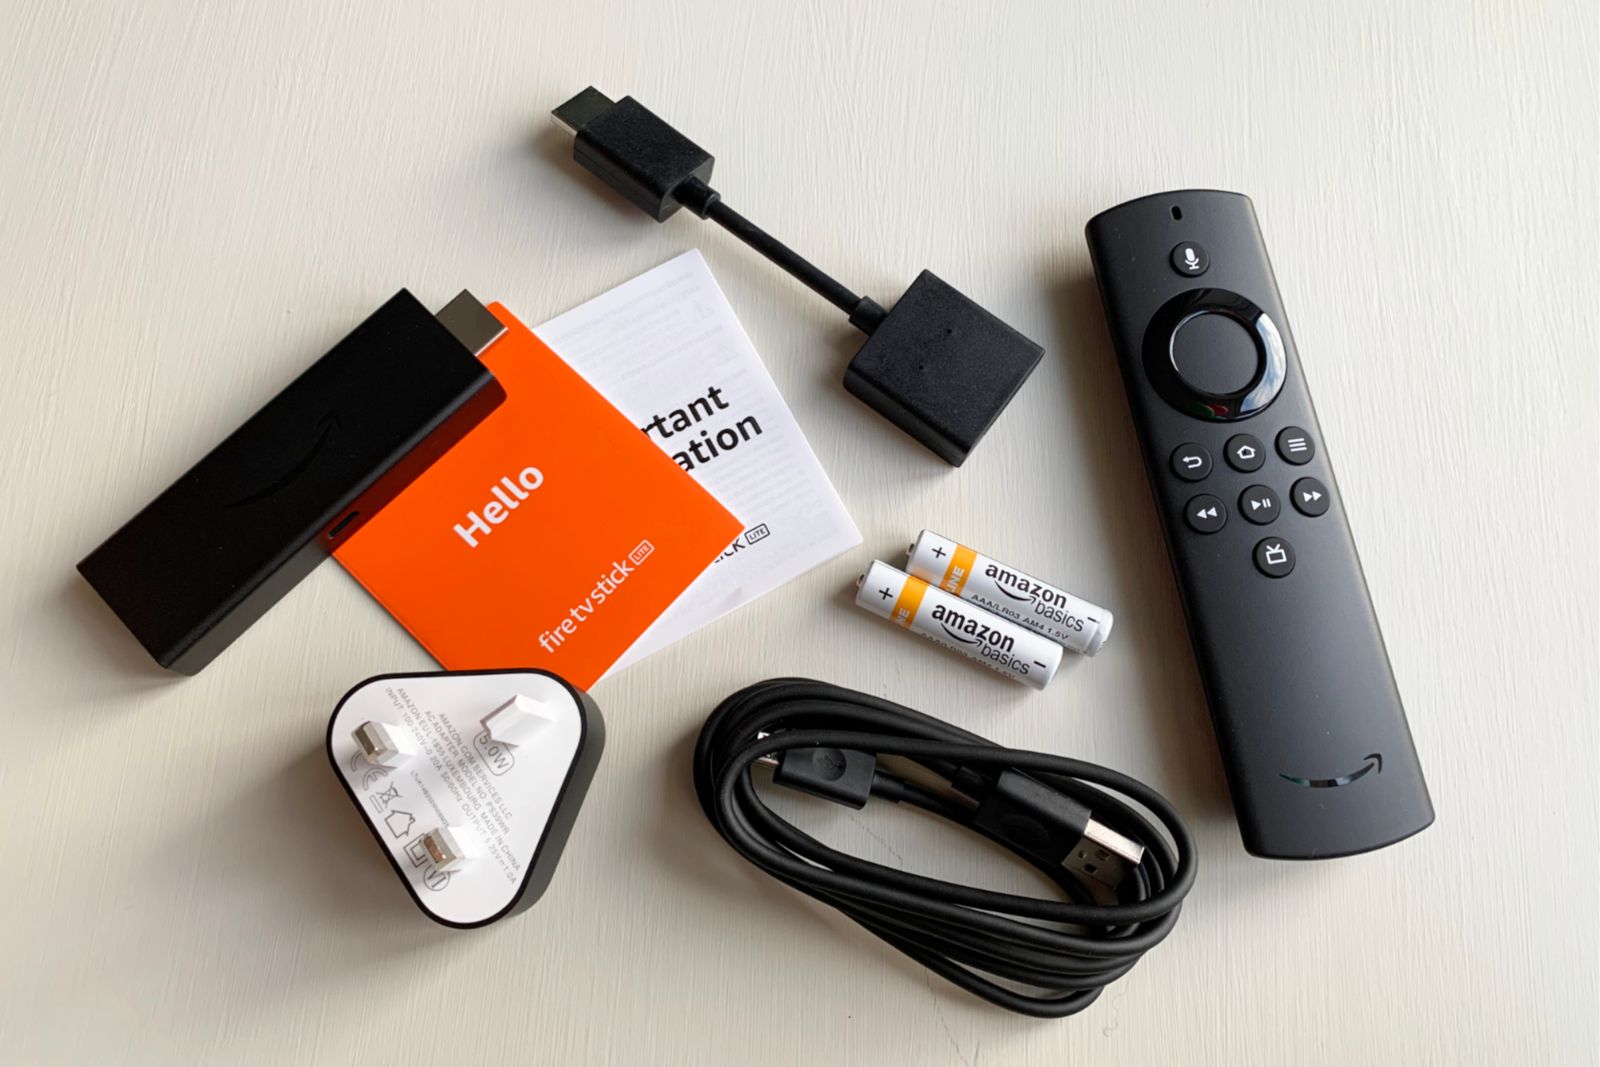 Fire TV Stick and Fire TV Stick Lite review: Exactly what you expected